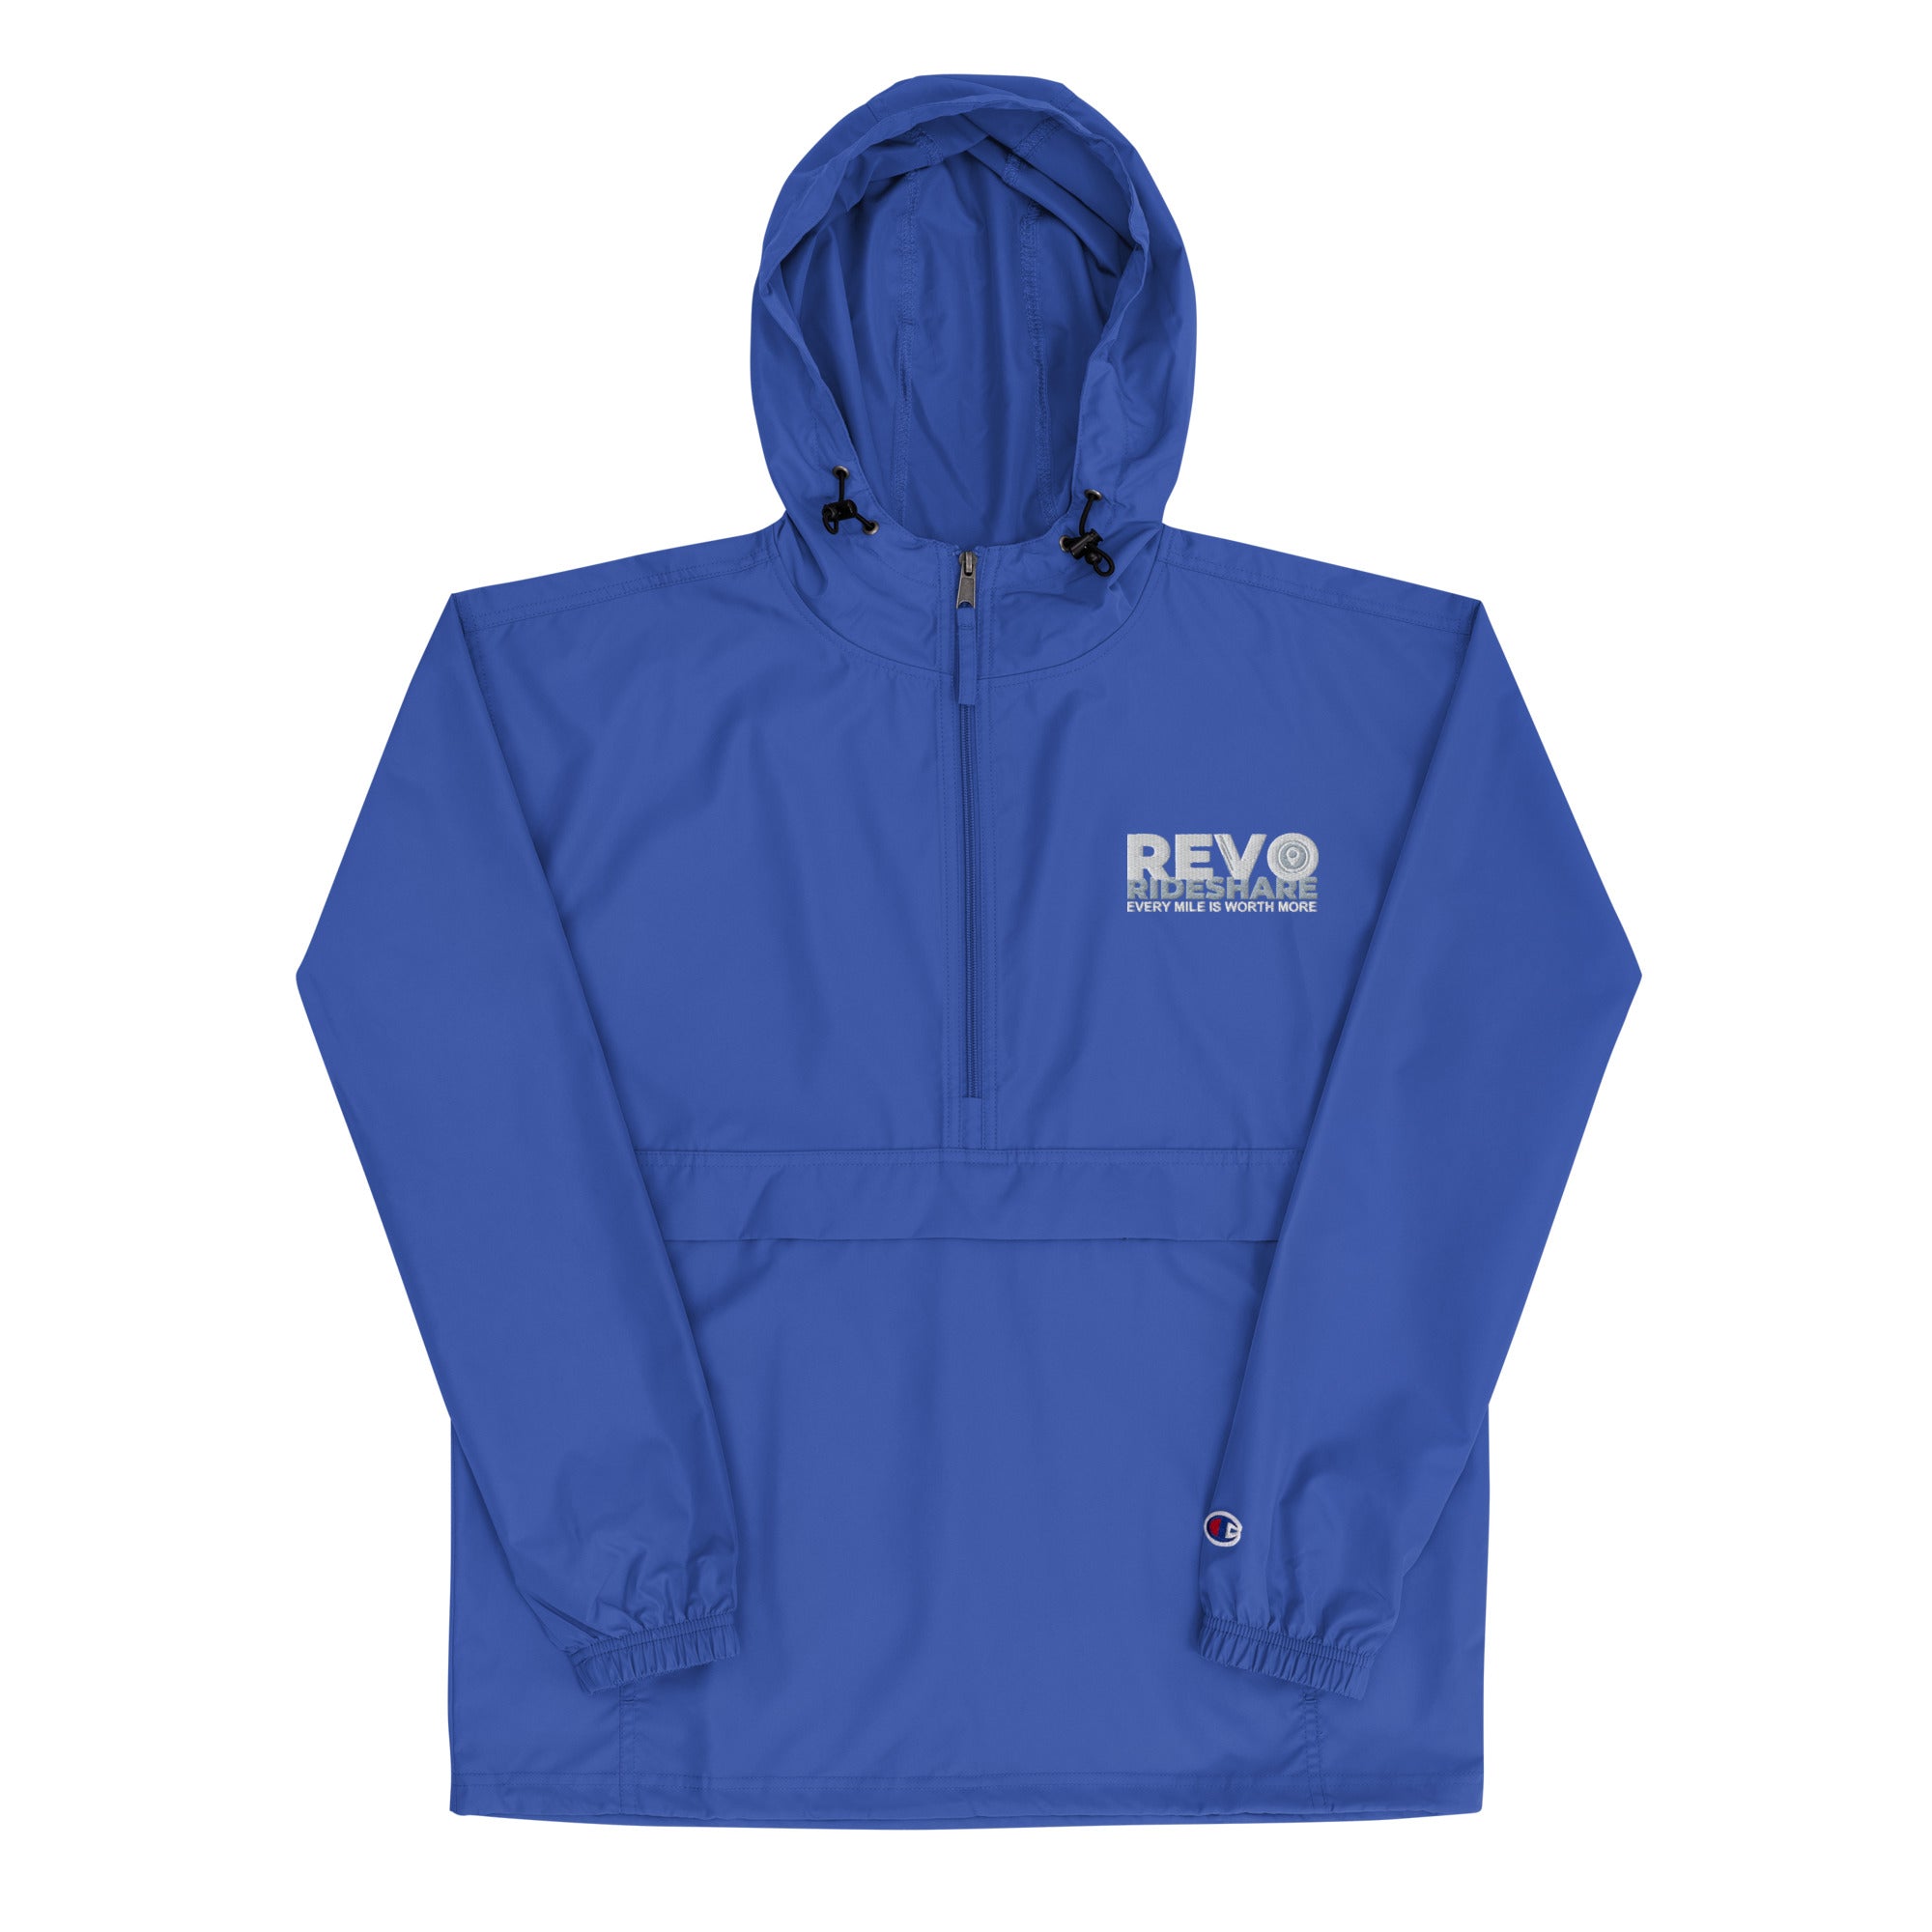 REVO Rideshare Embroidered Champion Packable Jacket